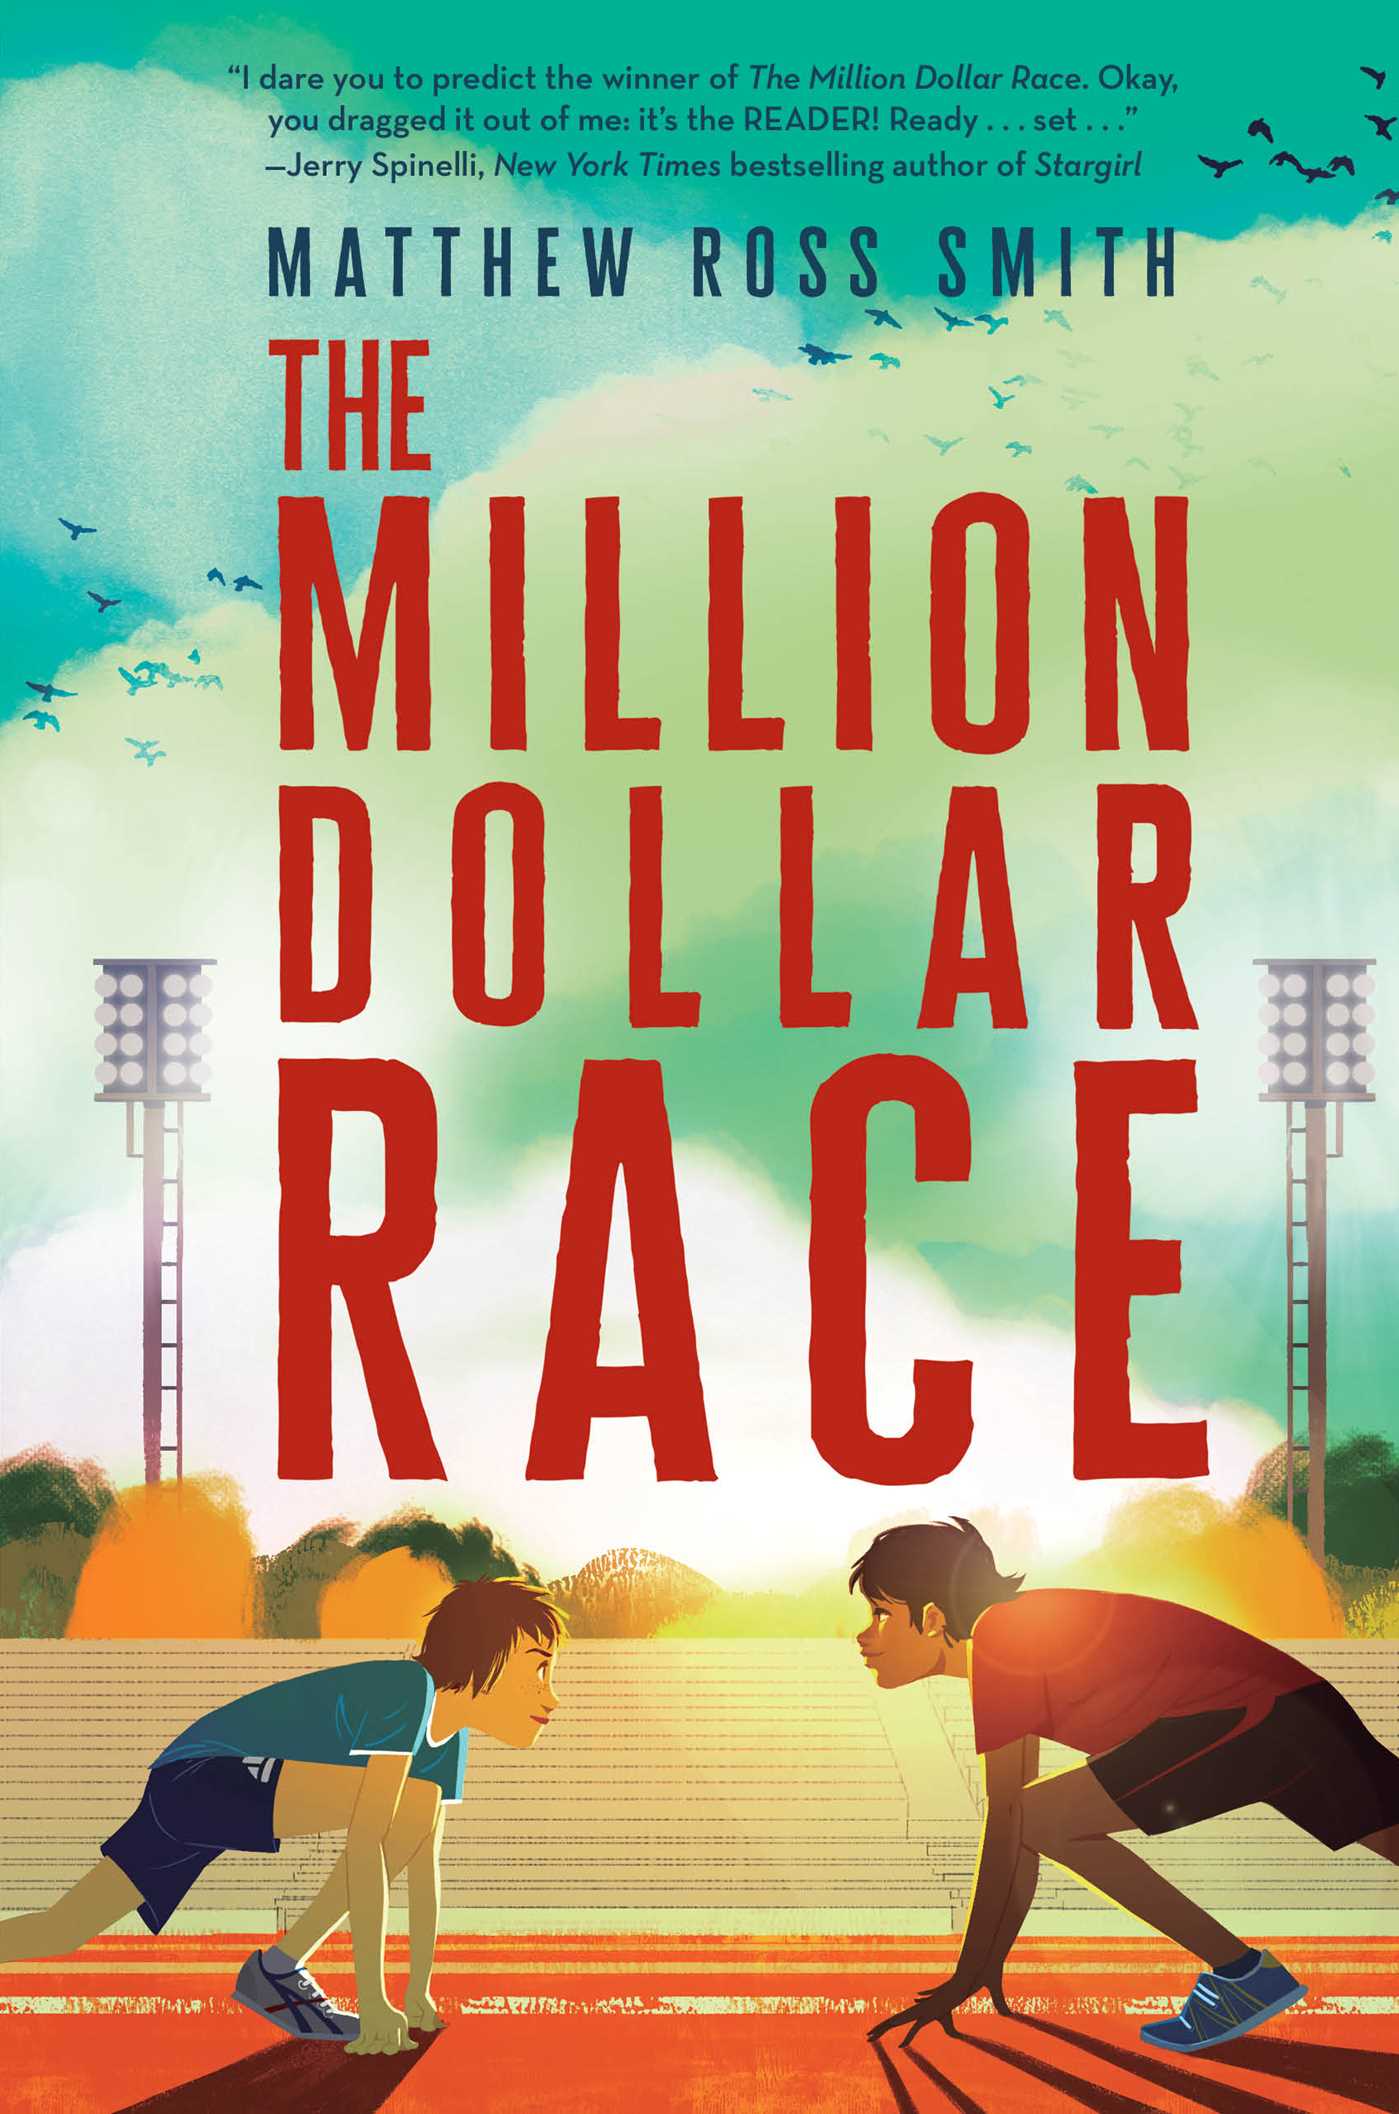 Cover of "The Million Dollar Race" by Matthew Ross Smith